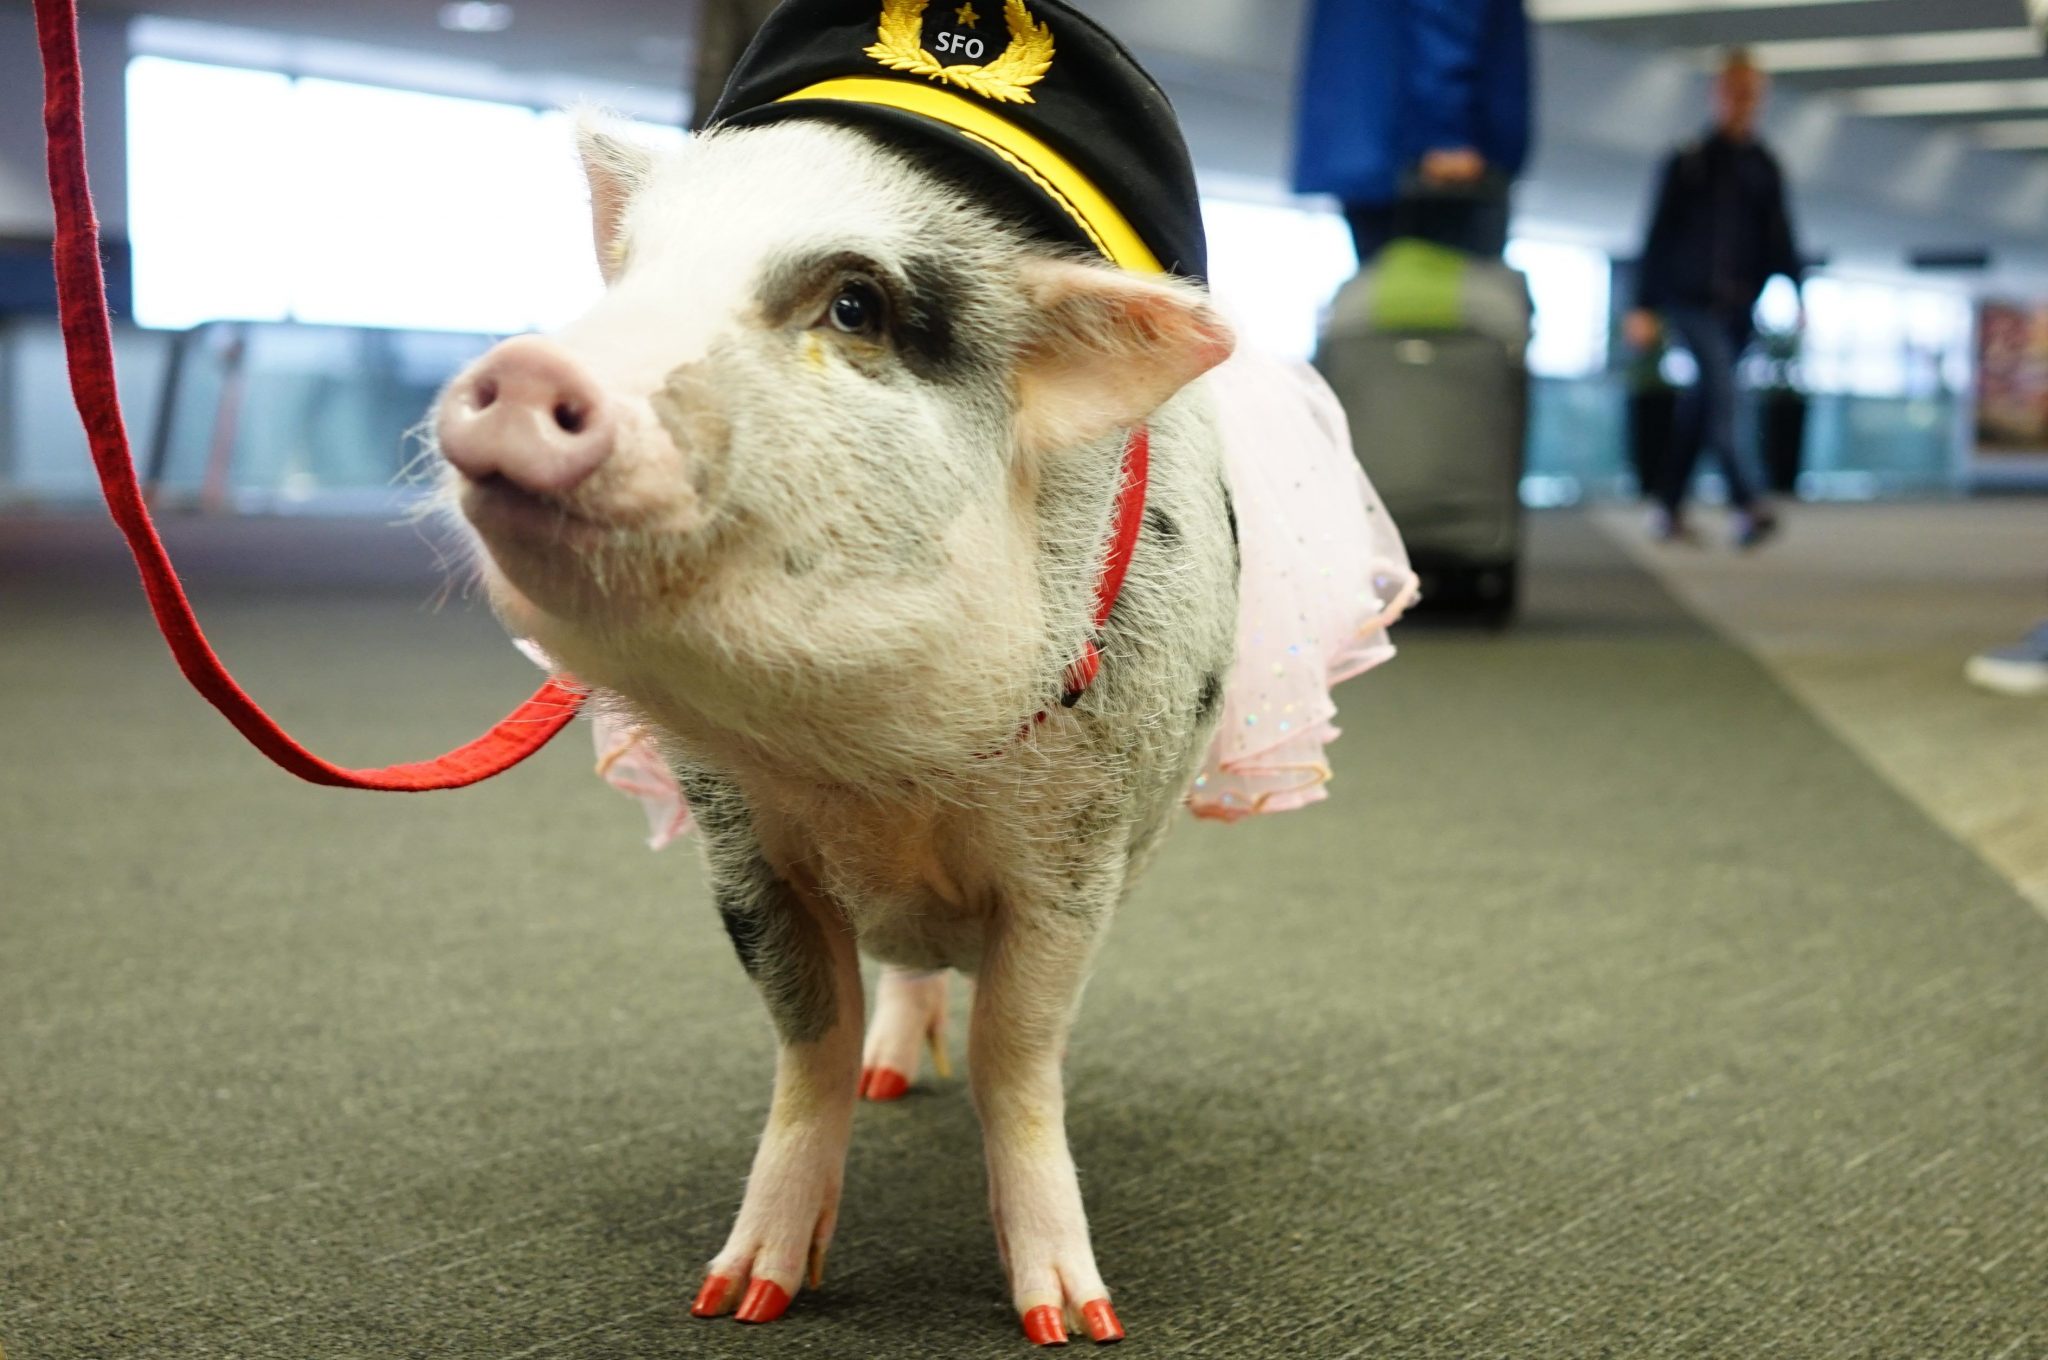 San Francisco Airport Introduces Its First Therapy Pig